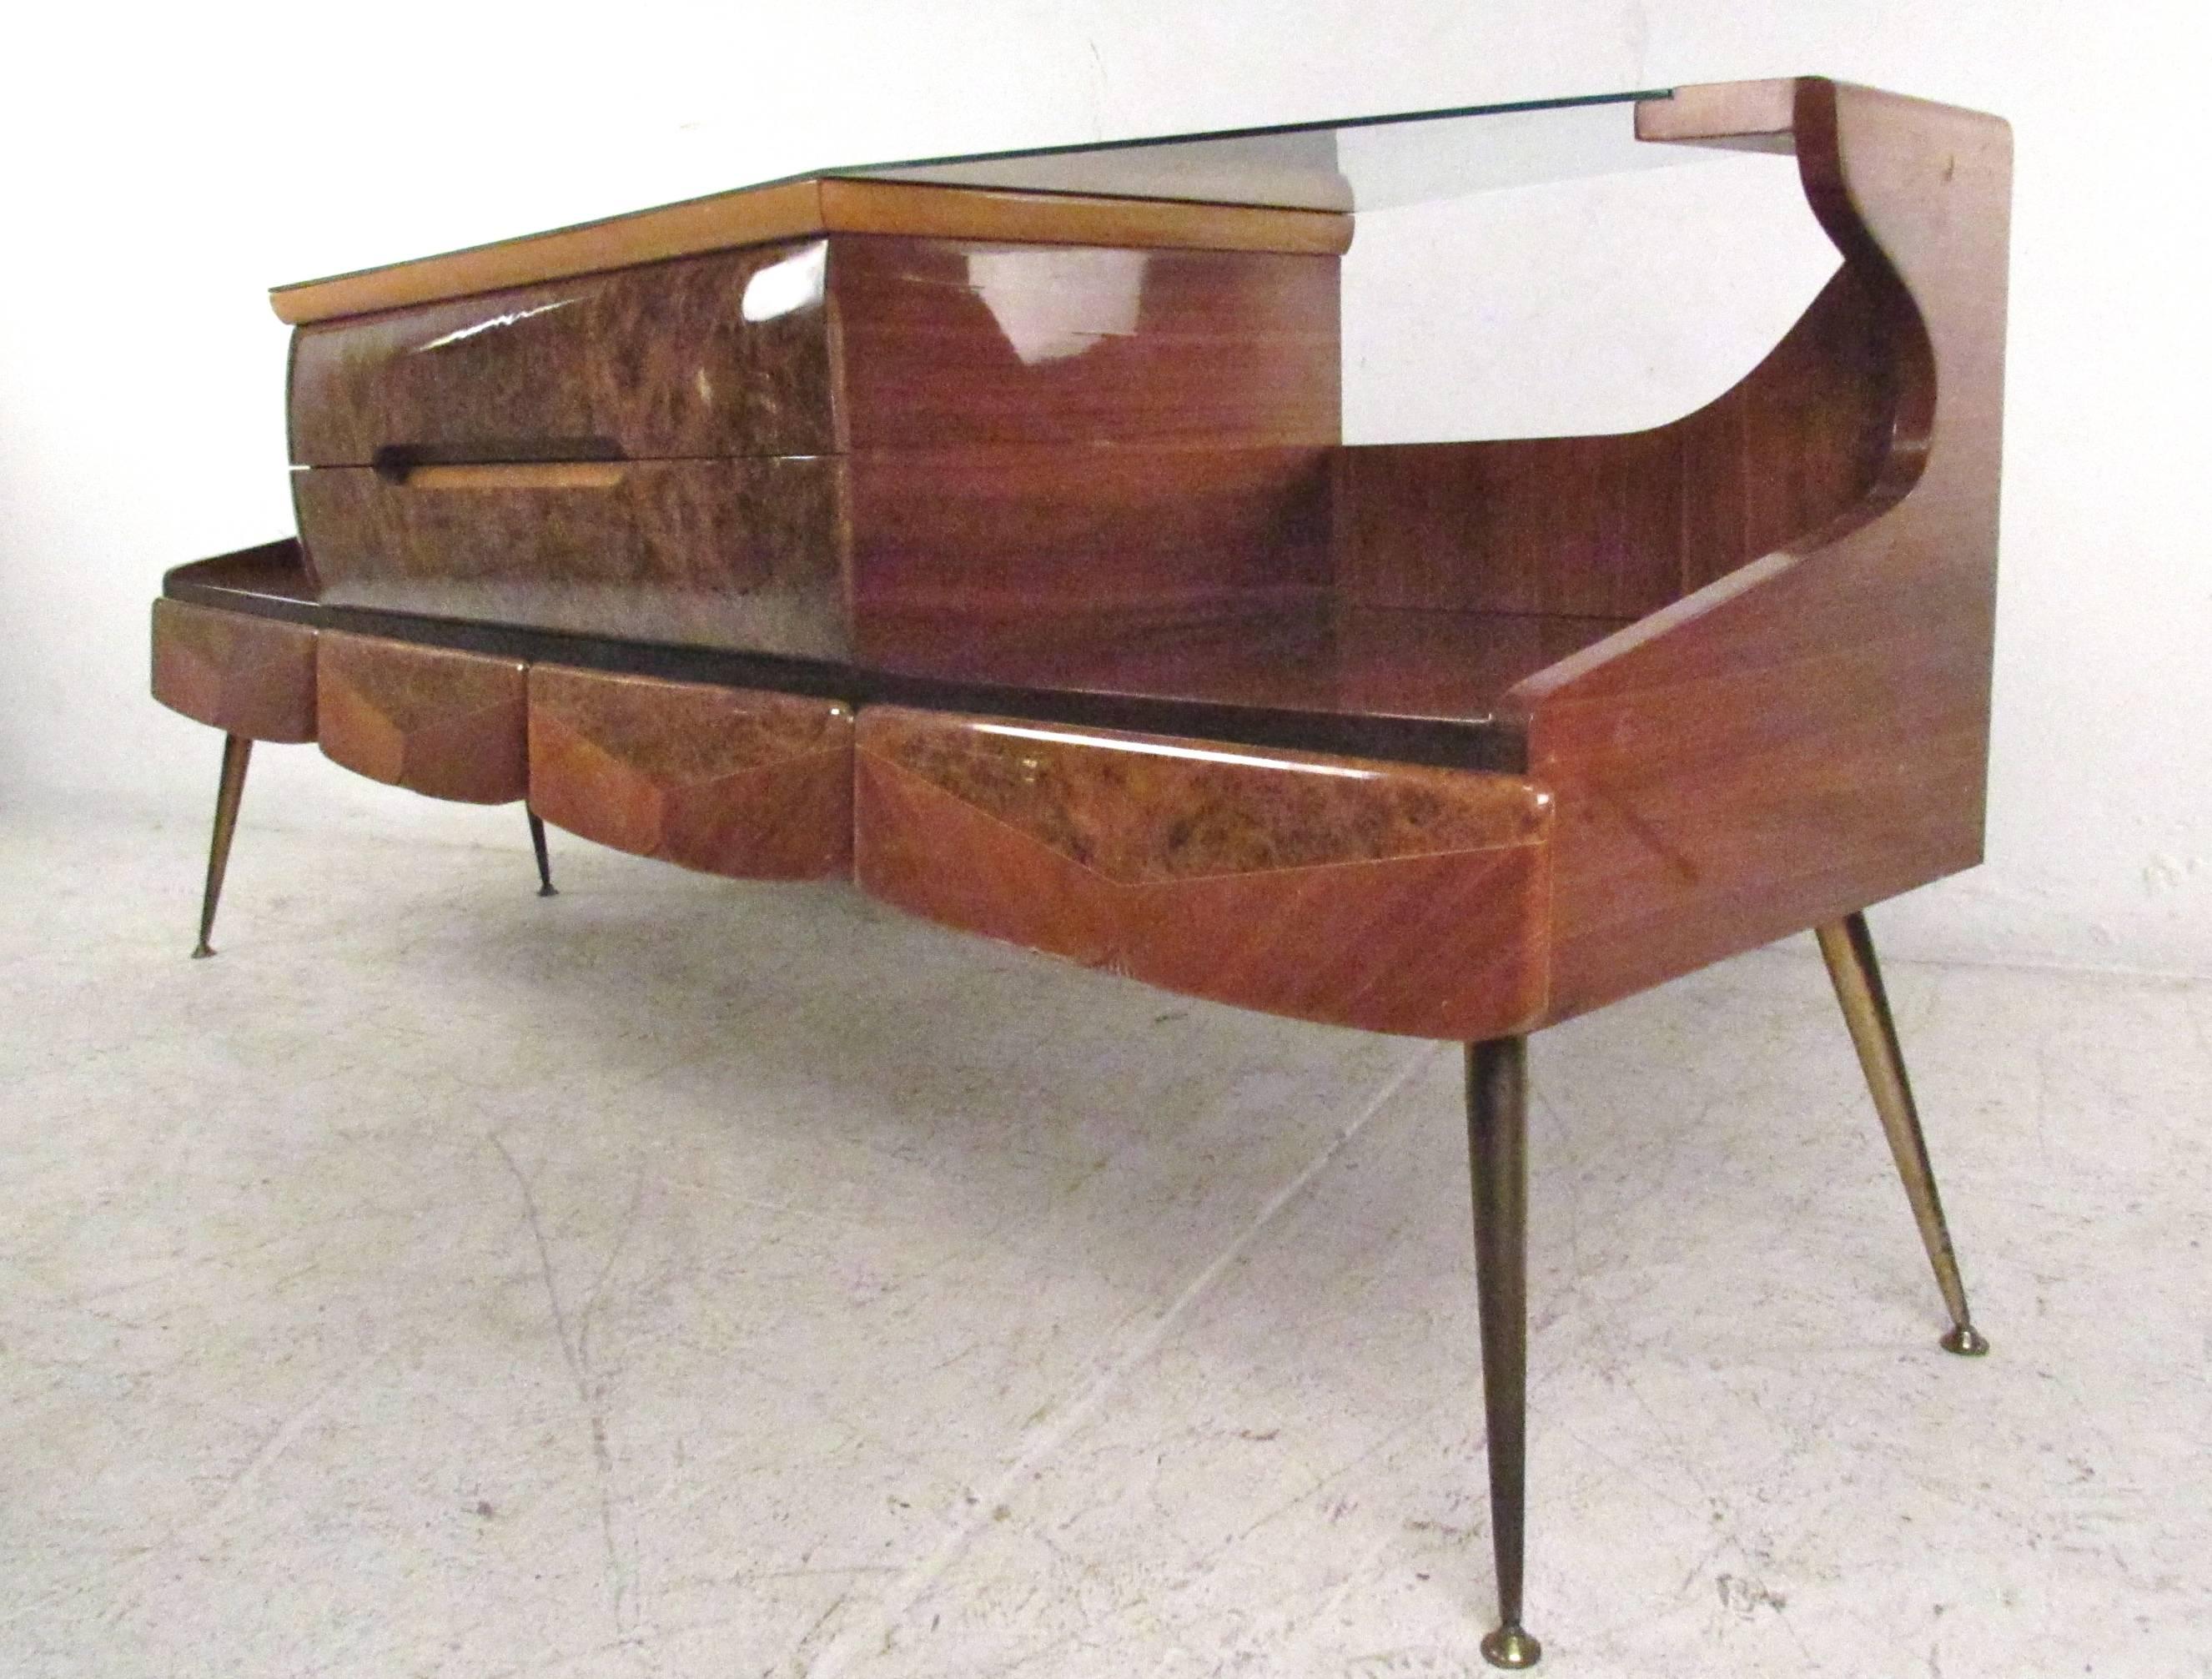 This stunning vintage sideboard features a lacquered burl wood finish, tapered brass legs, textured glass top and a unique shape. Please confirm item location (NY or NJ.)